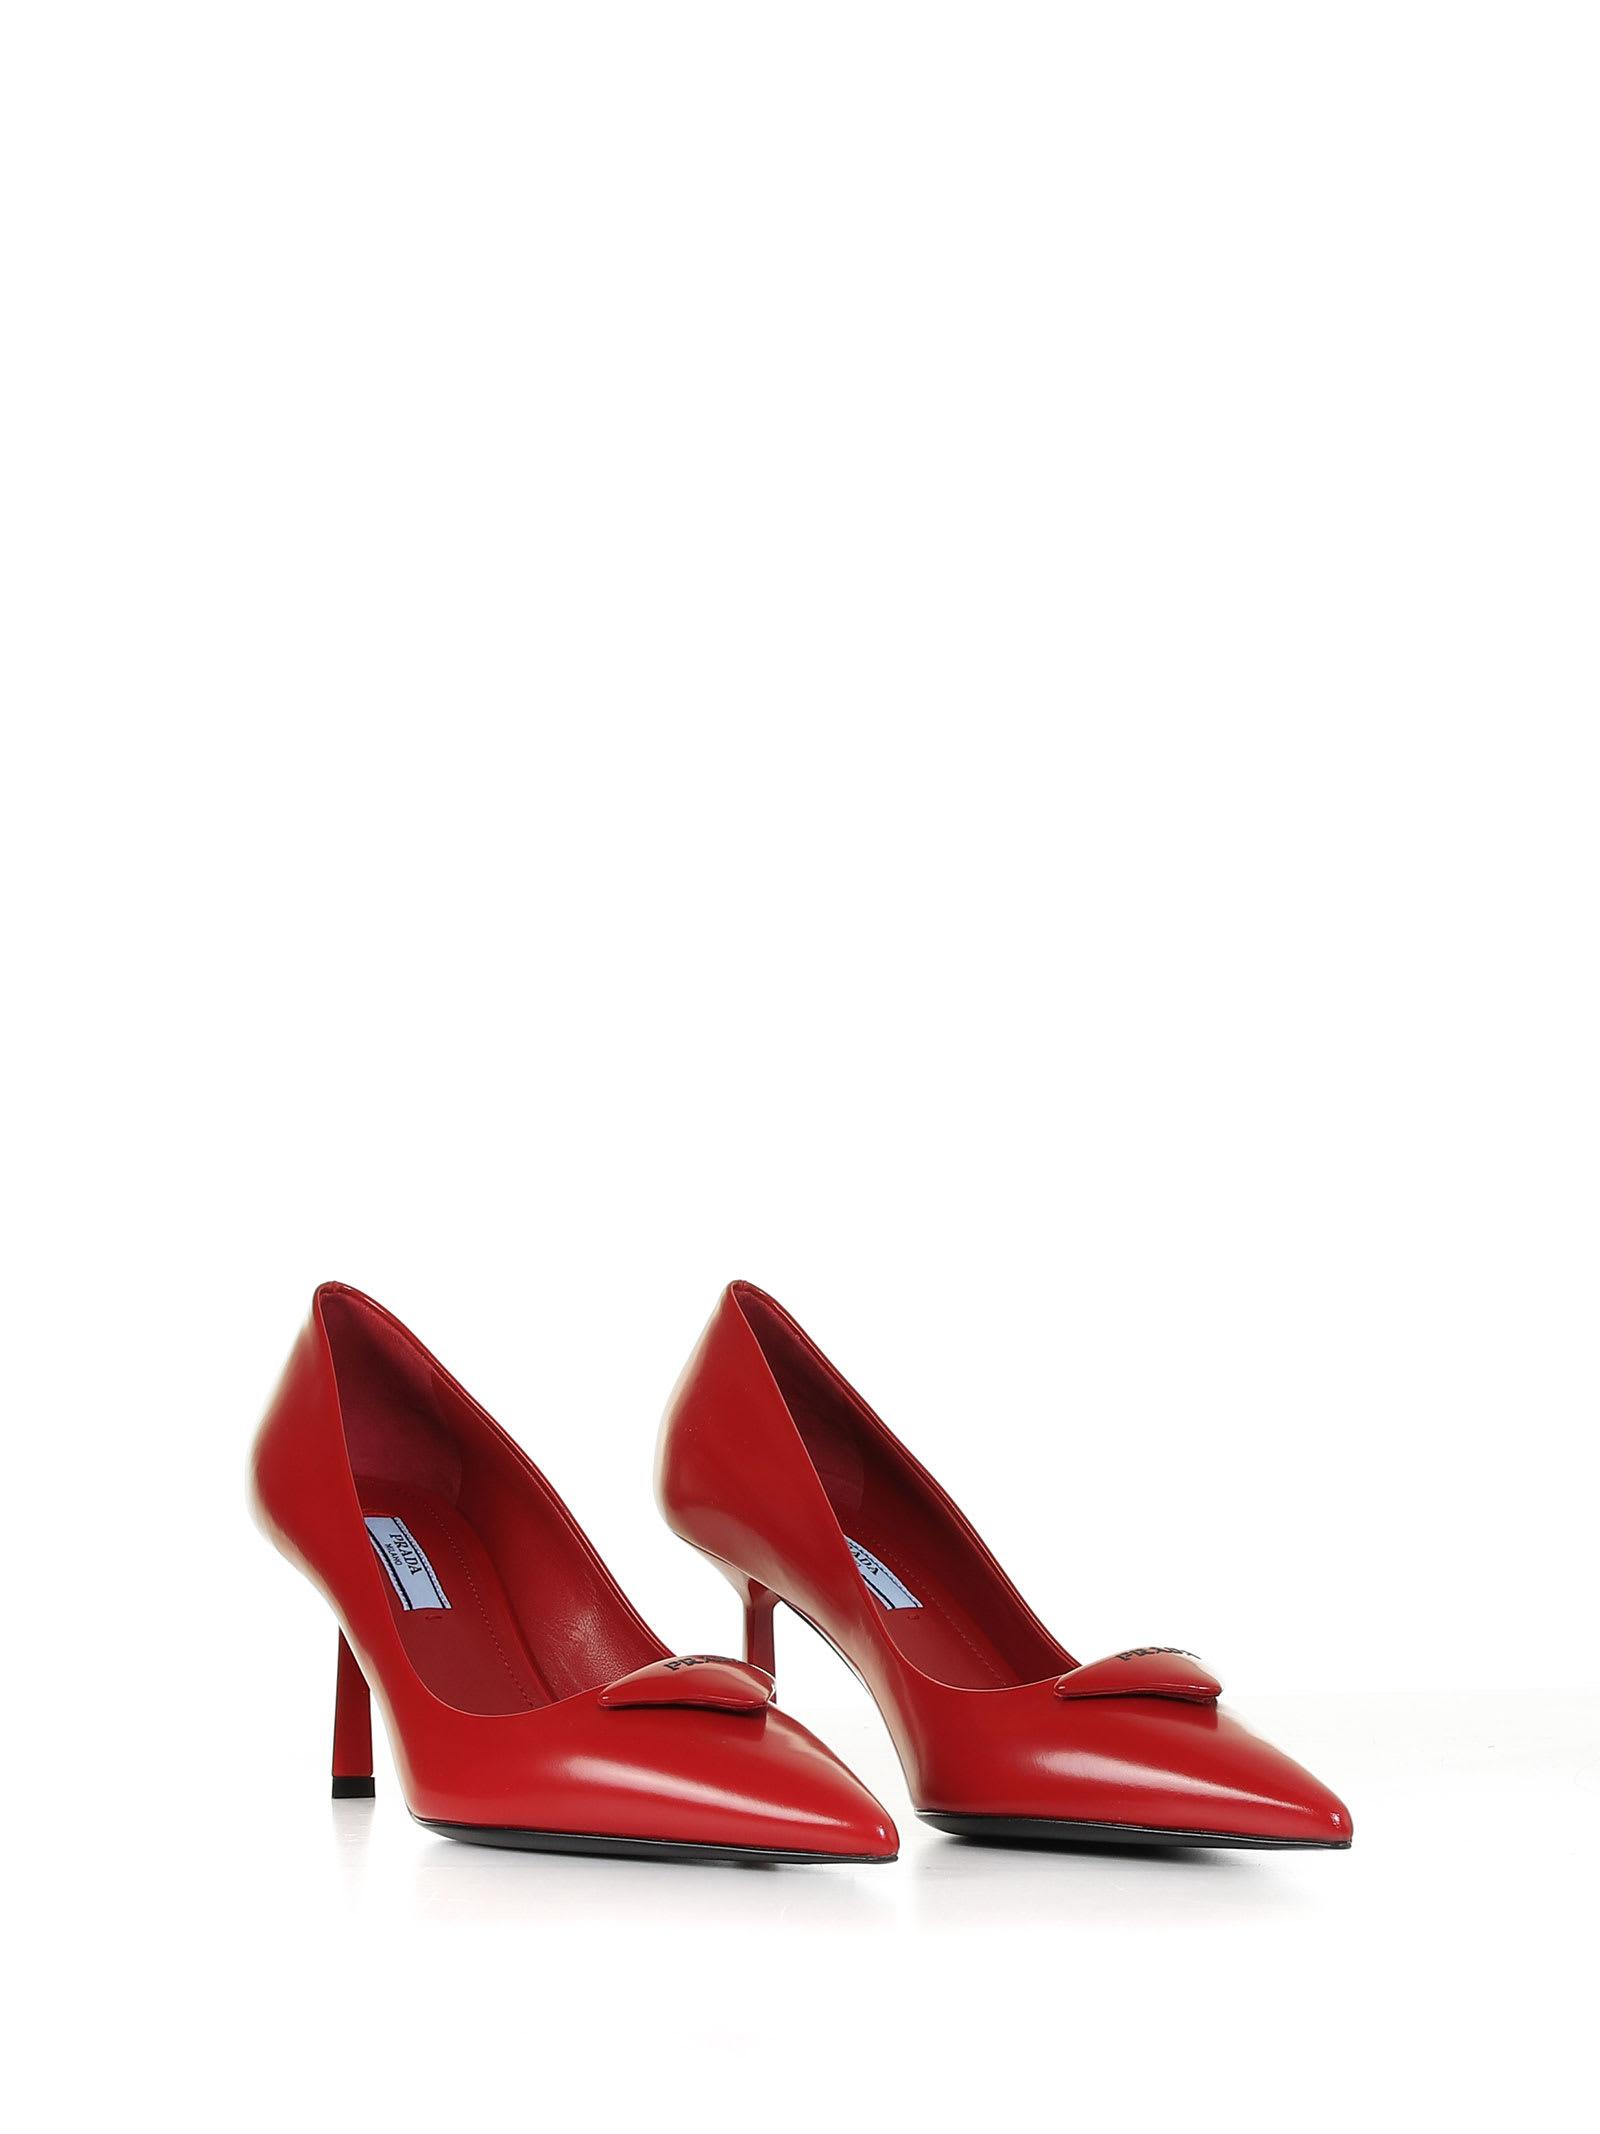 Prada Leather Pumps in Red | Lyst